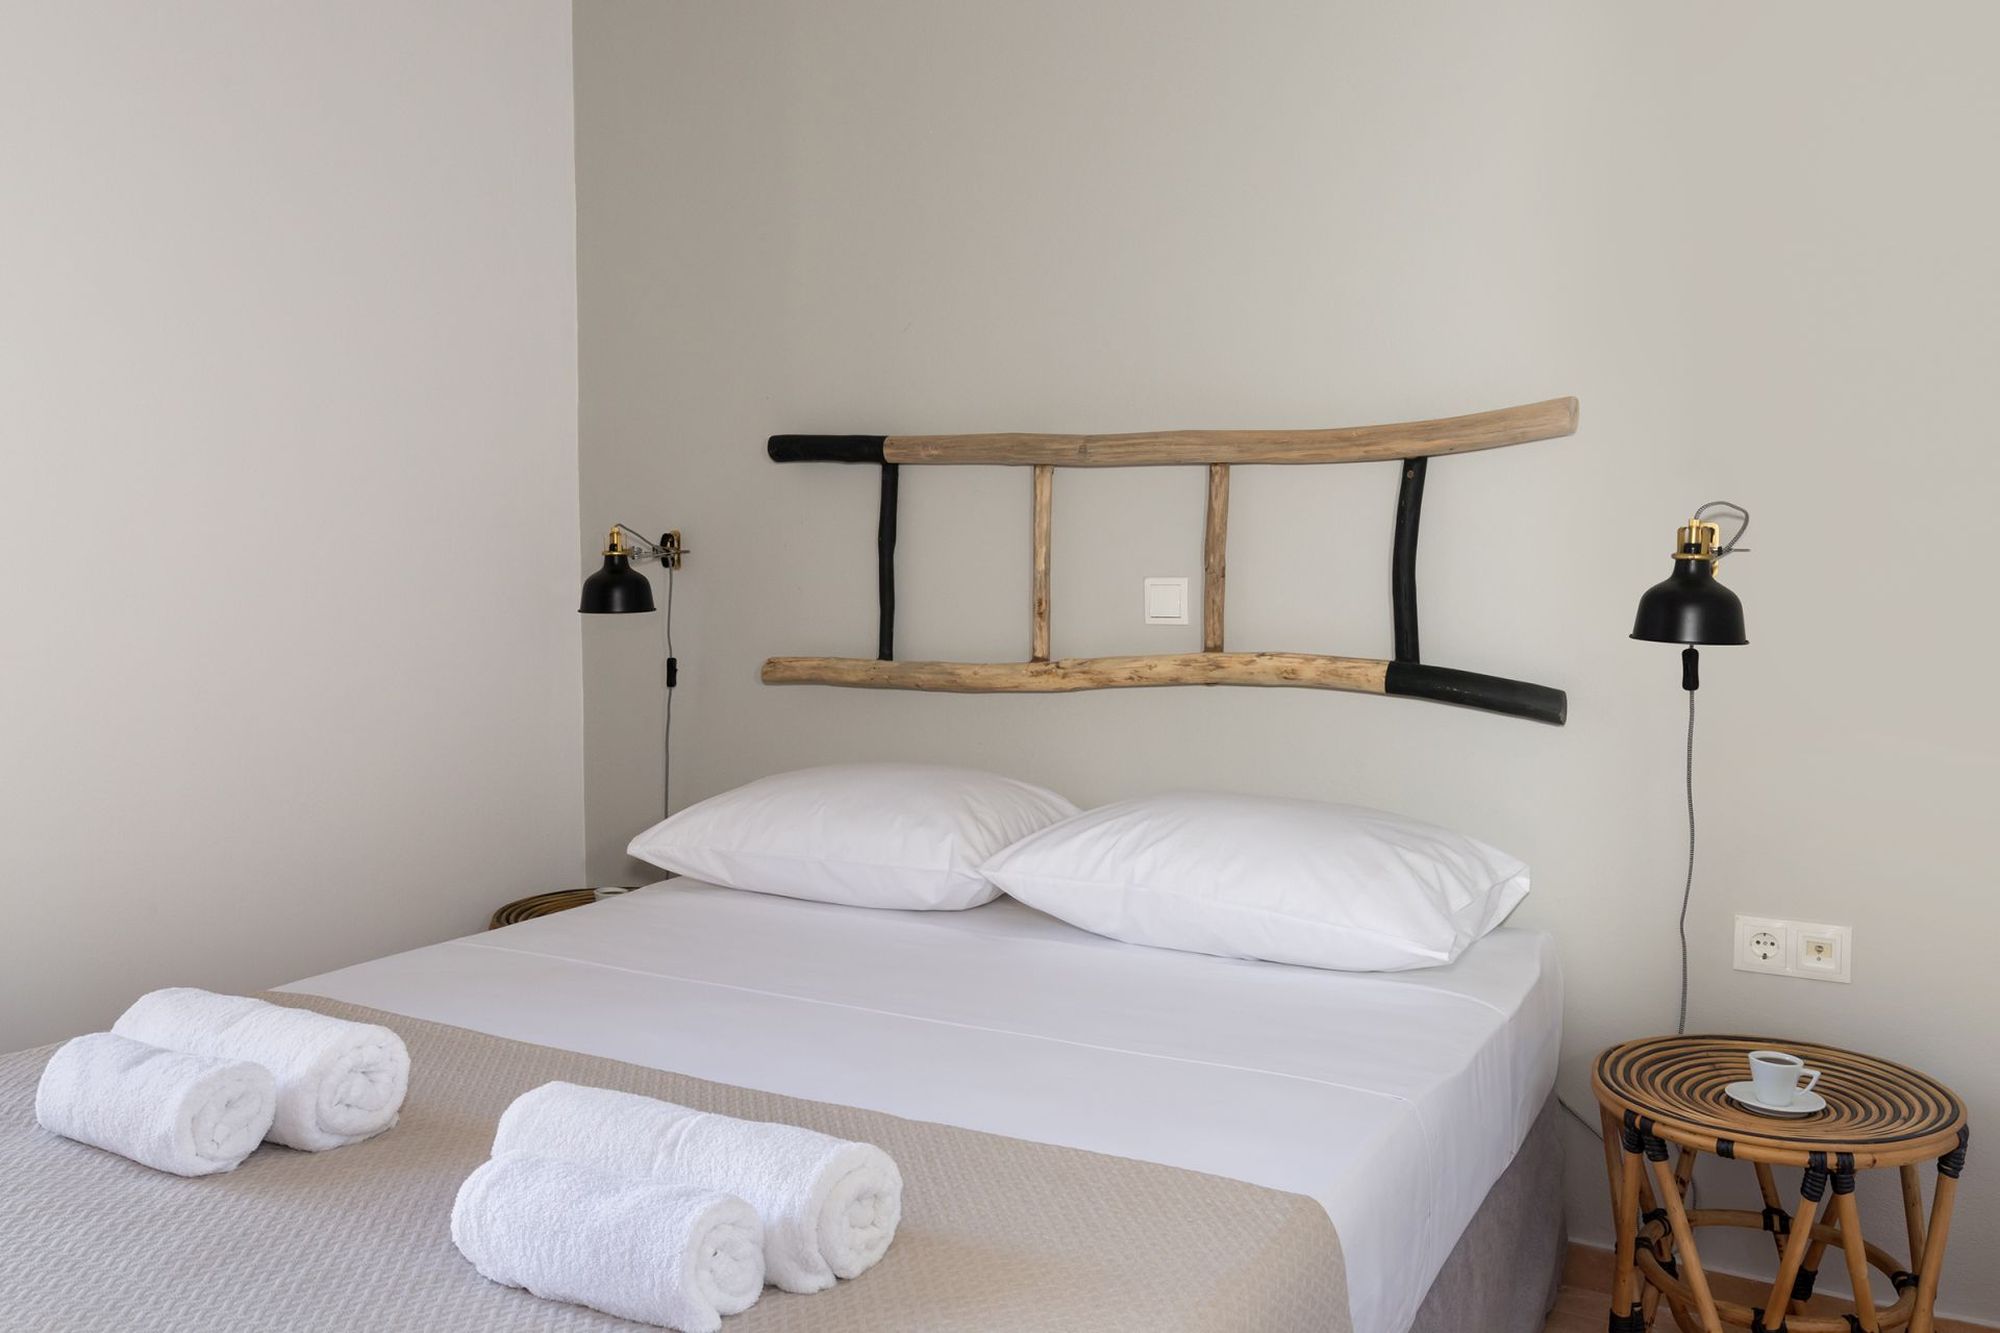 Bedroom with a double bed, wooden bedside tables, black wall lights and a decorative wooden ladder on the wall above the bed.